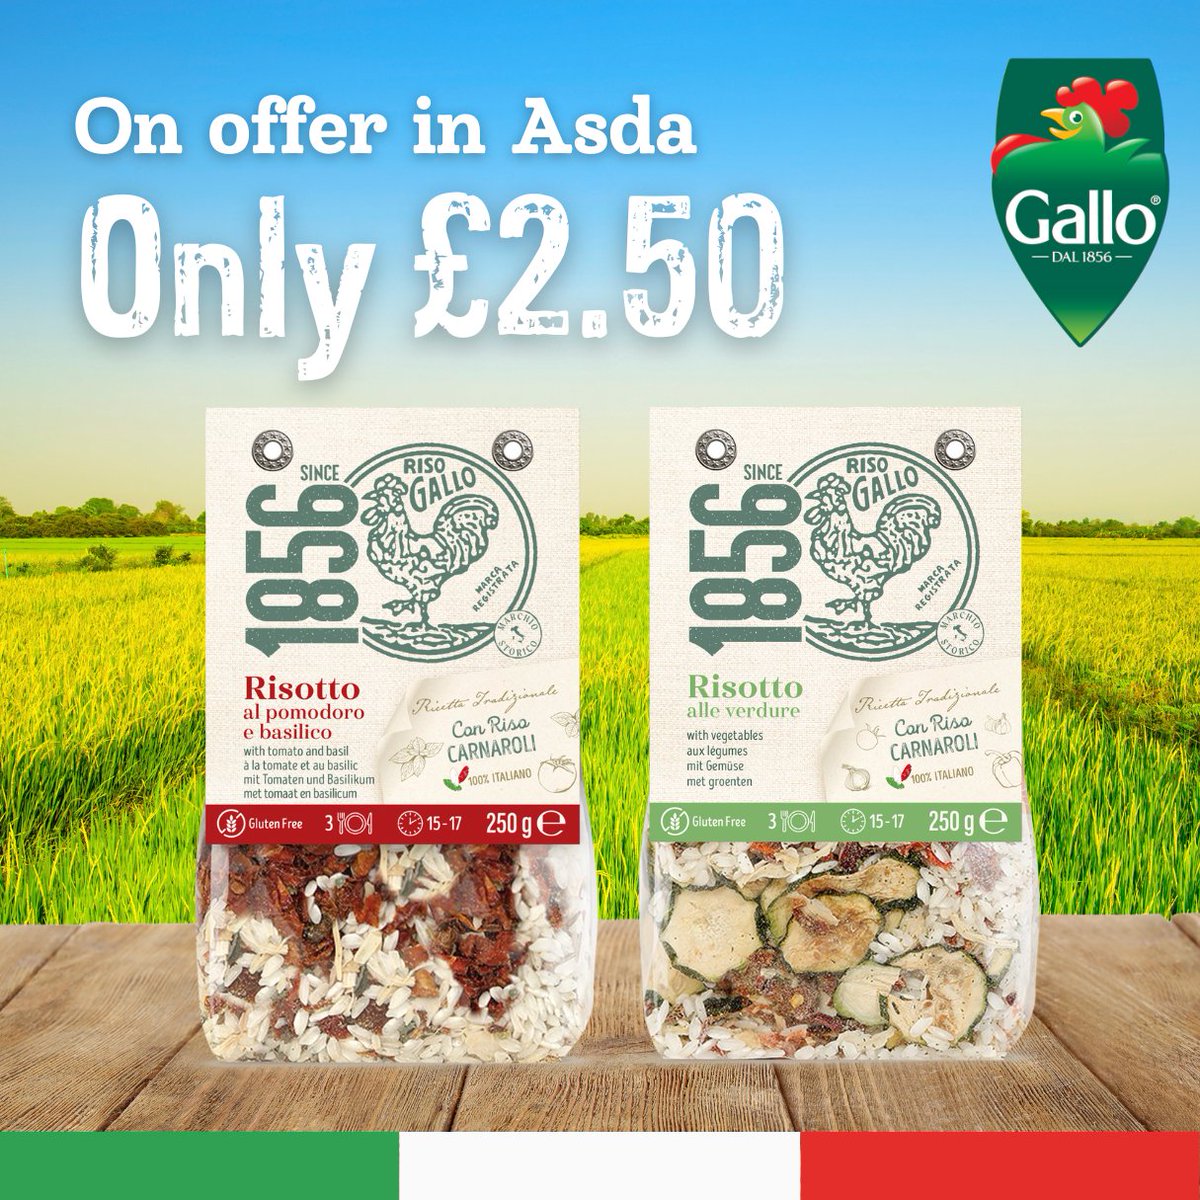 Have you given our 1856 Risotto pouches a try? These risottos are made using traditional recipes, combining premium dried ingredients with the finest Carnaroli rice. On offer in @Asda for only £2.50! #supermarketoffer #supermarket #supermarketdeal #ASDA #ASDAoffers